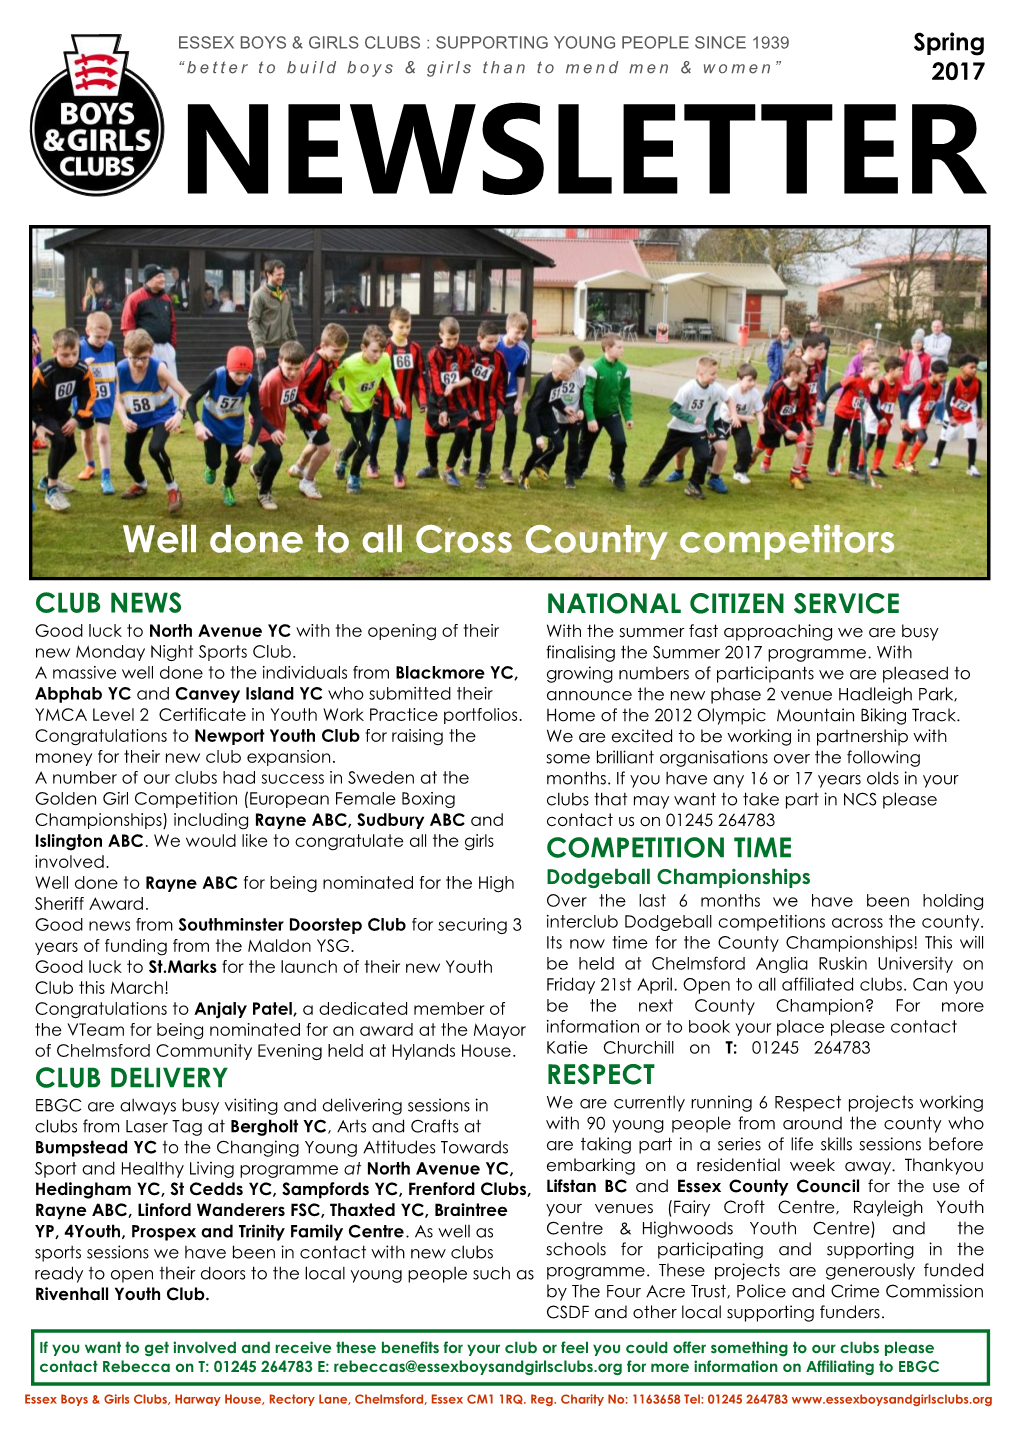 Well Done to All Cross Country Competitors